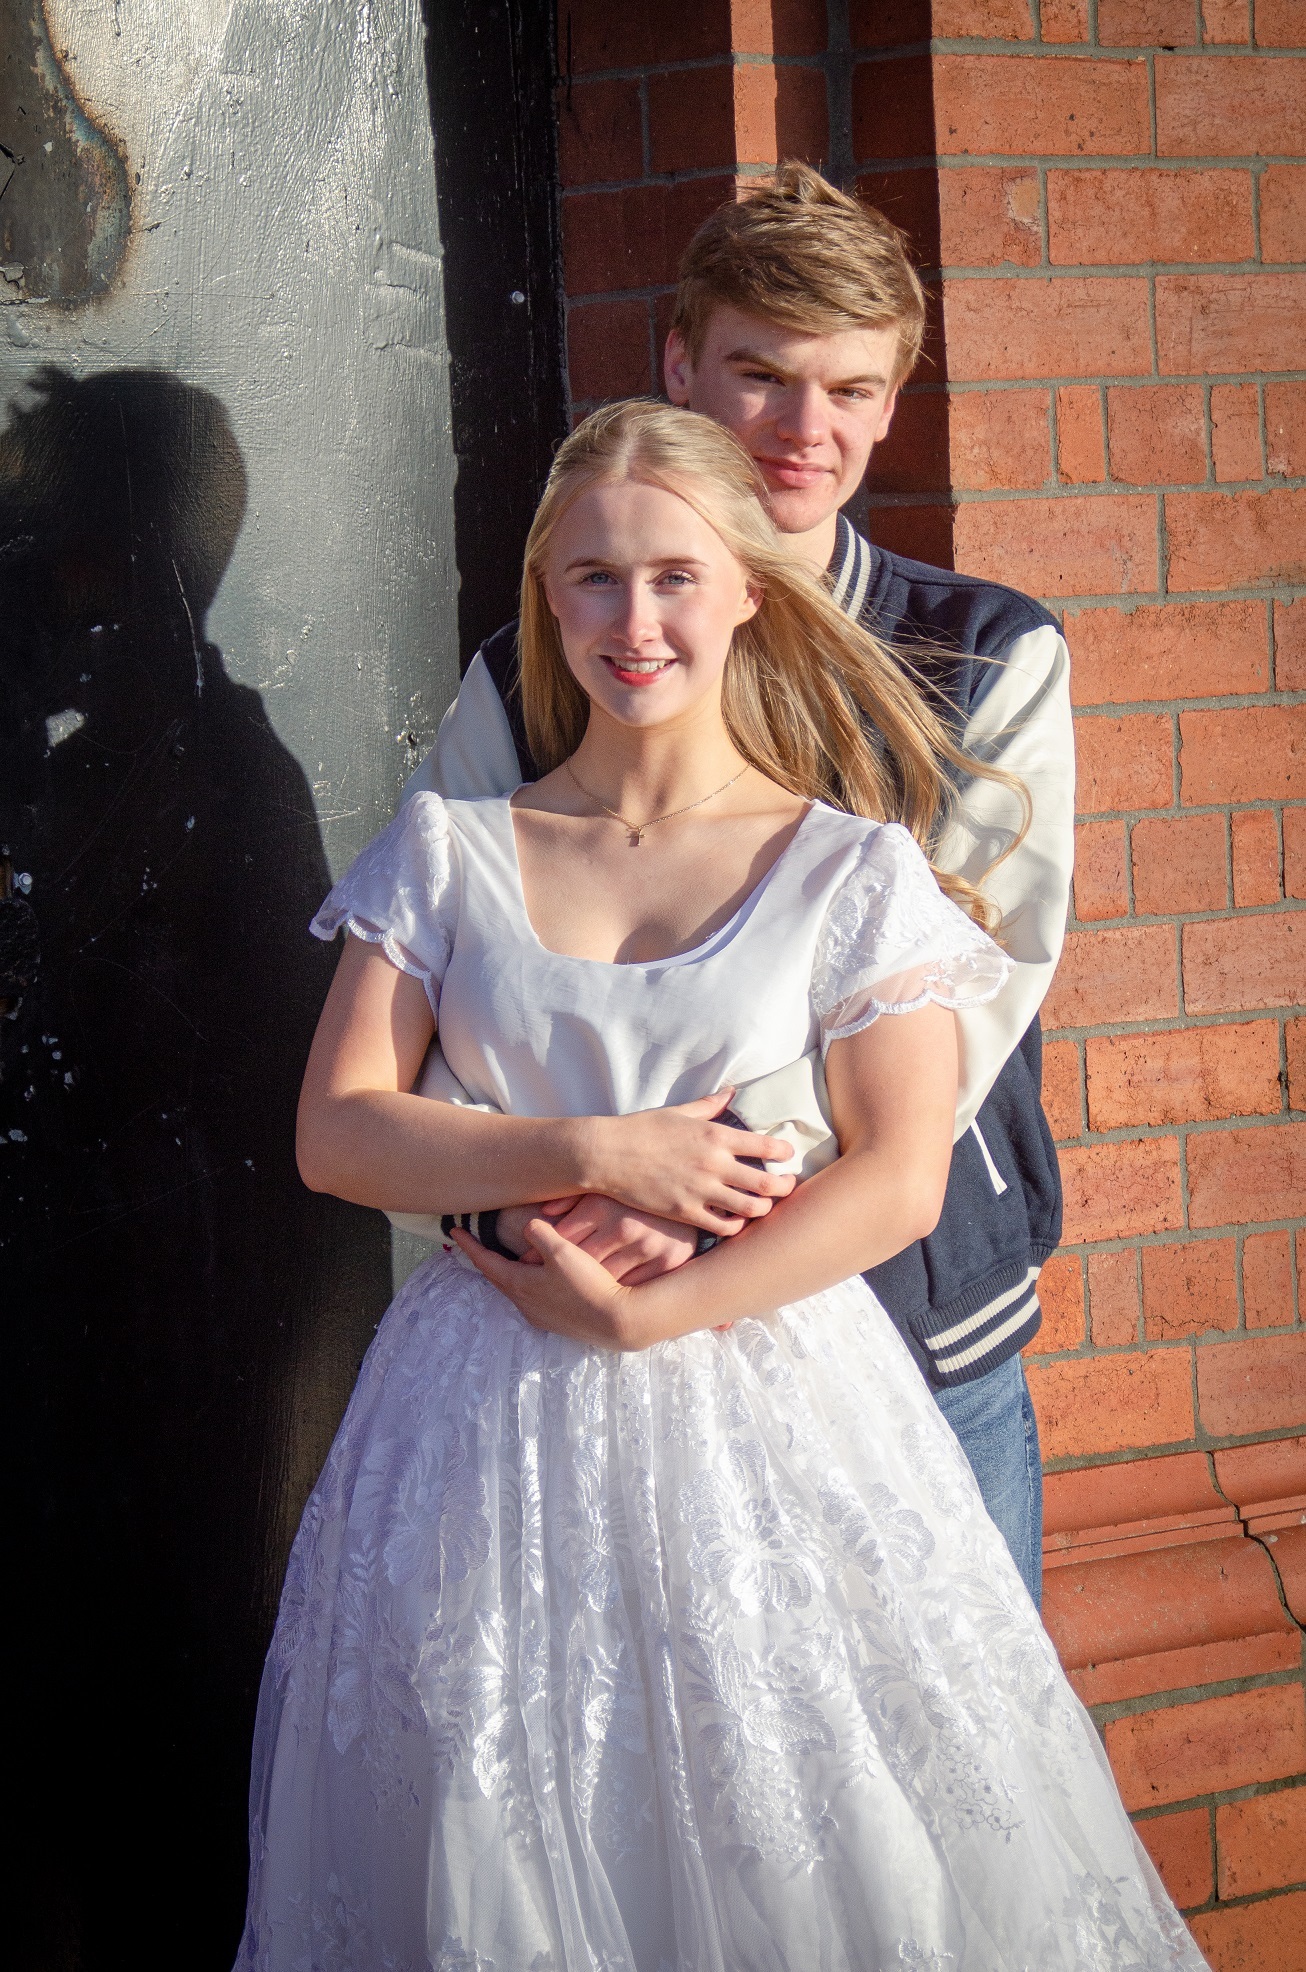 Tony and Maria in Crash Bang Wallop Youth Theatres production of West Side Story